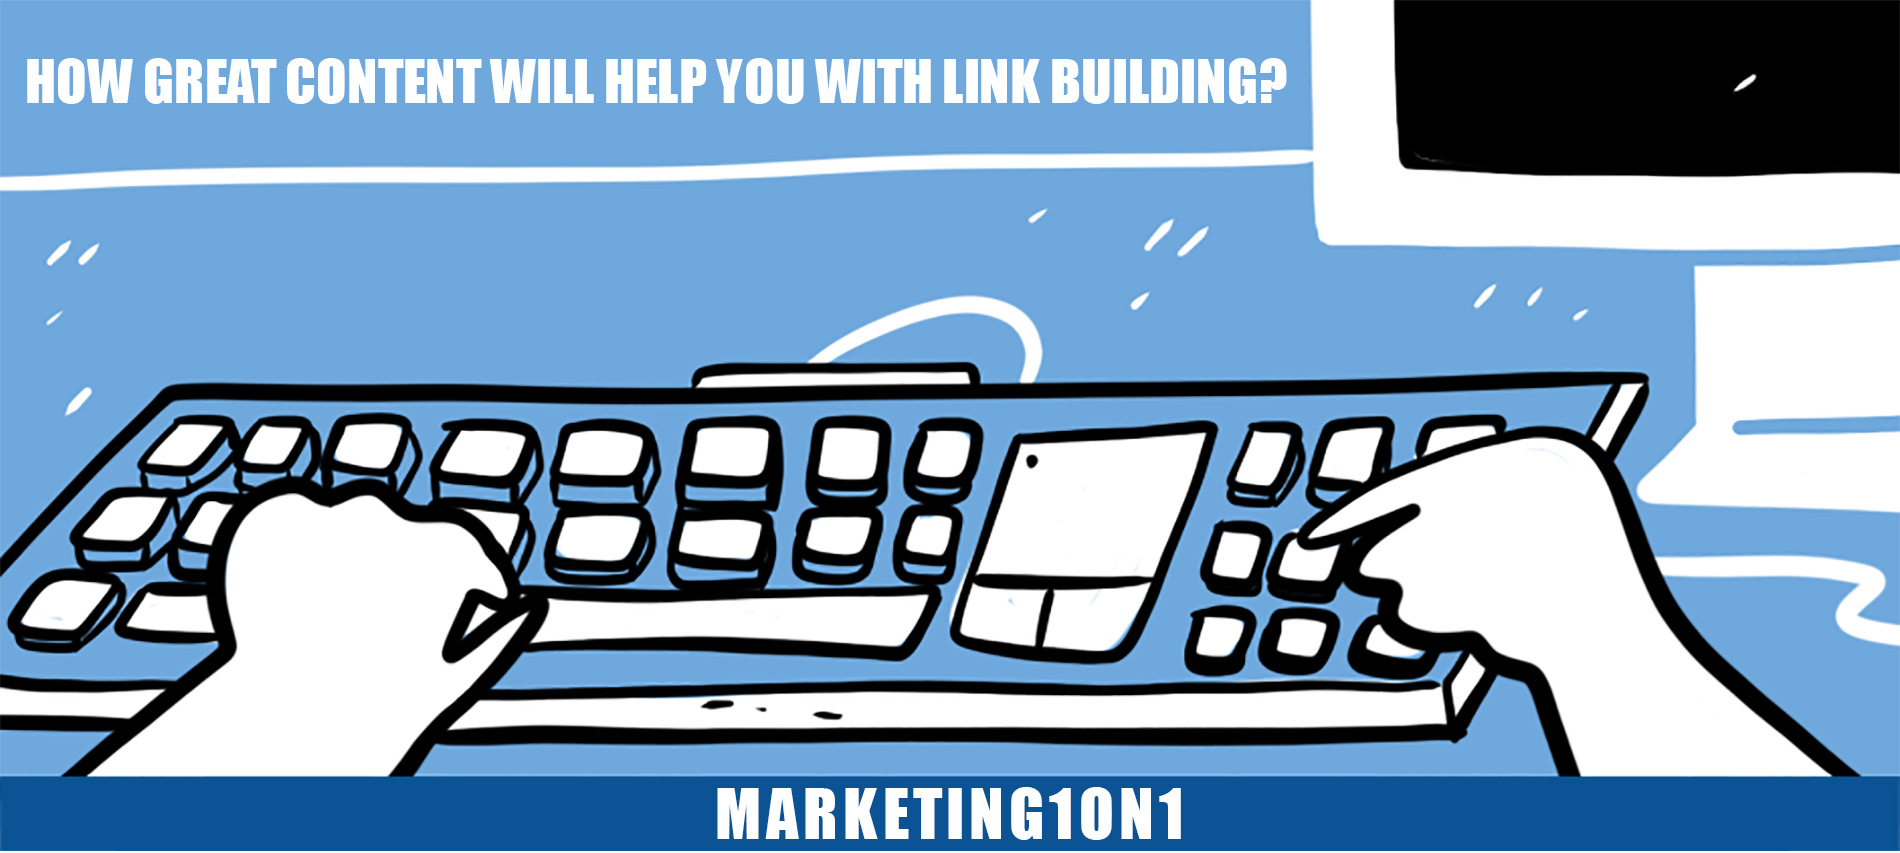 How great content will help you with link building?